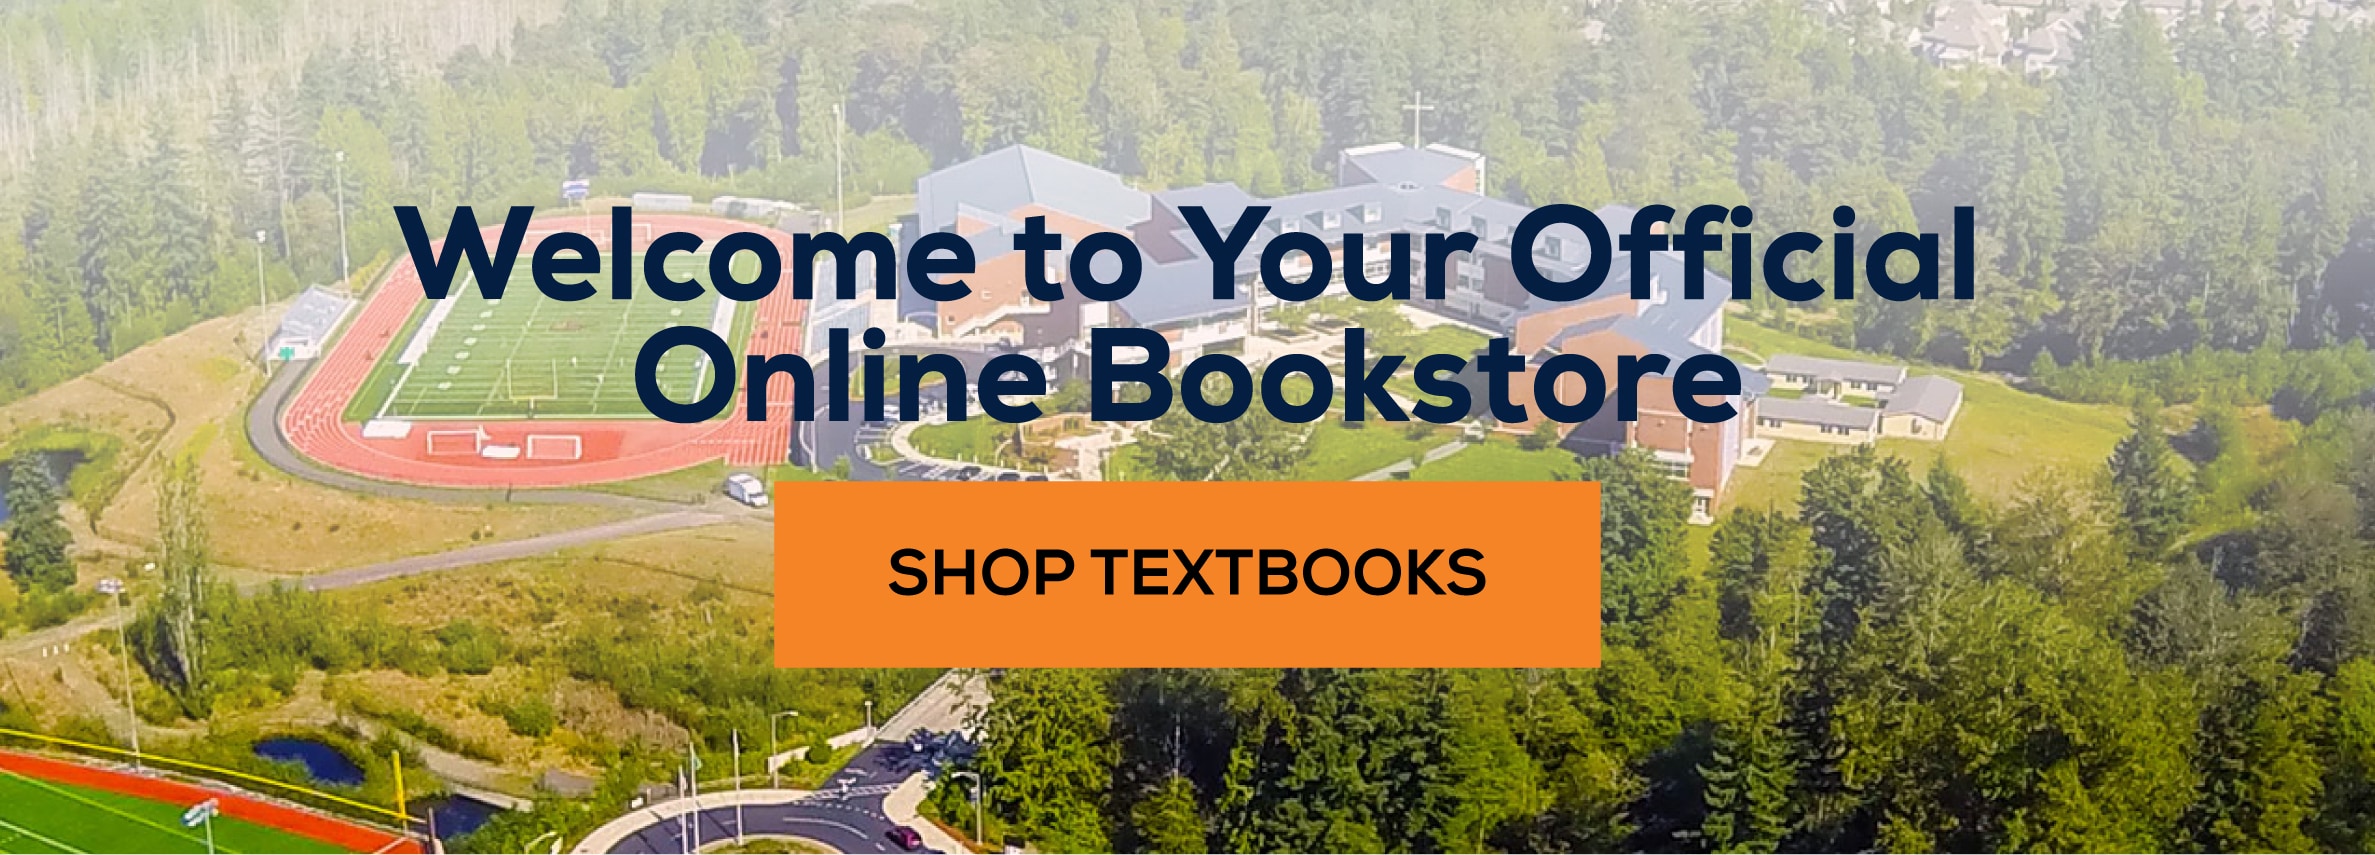 Welcome to your online bookstore. Shop Textbooks